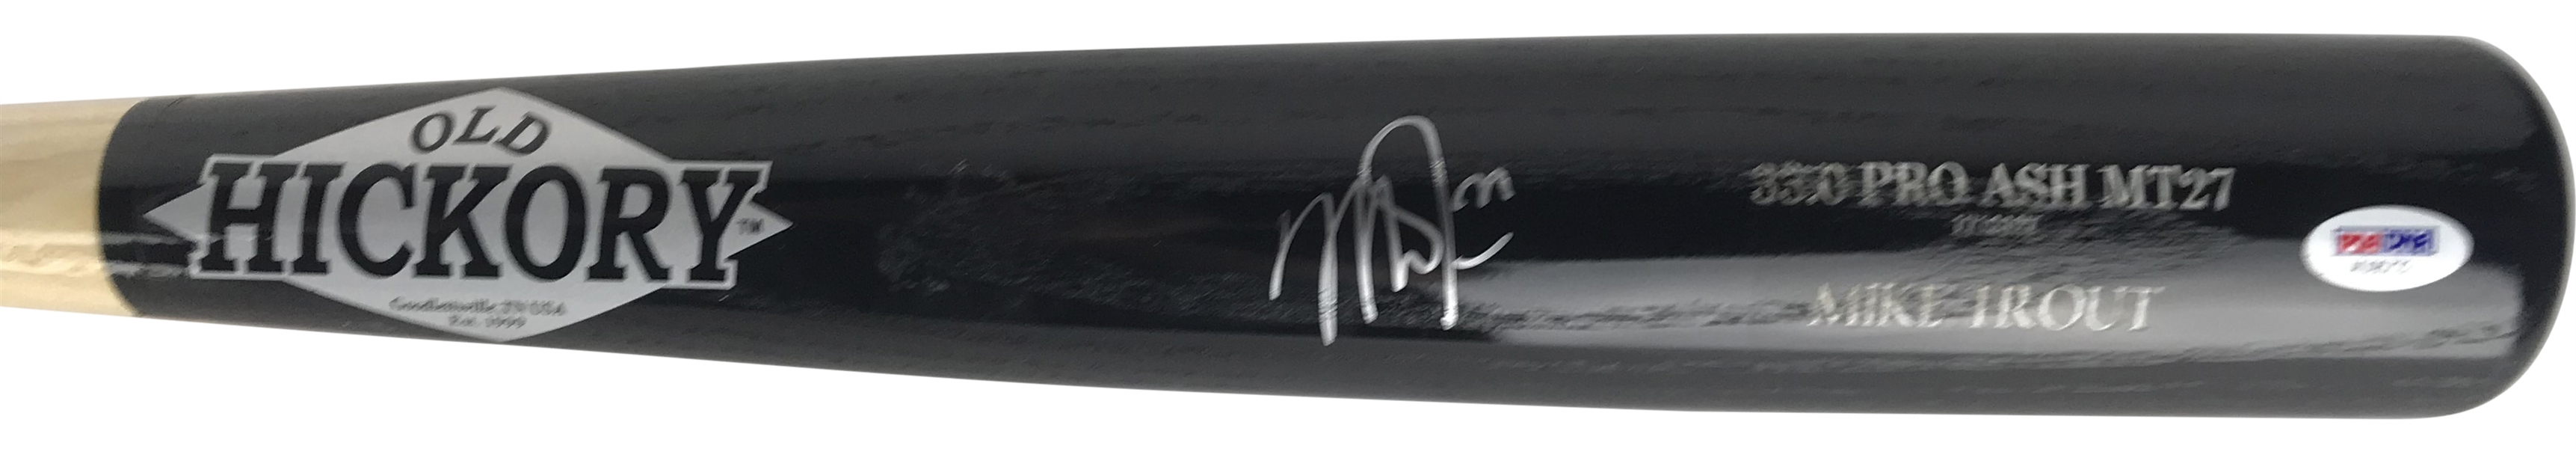 Mike Trout Signed Old Hickory Personal Model Baseball Bat (PSA/DNA)